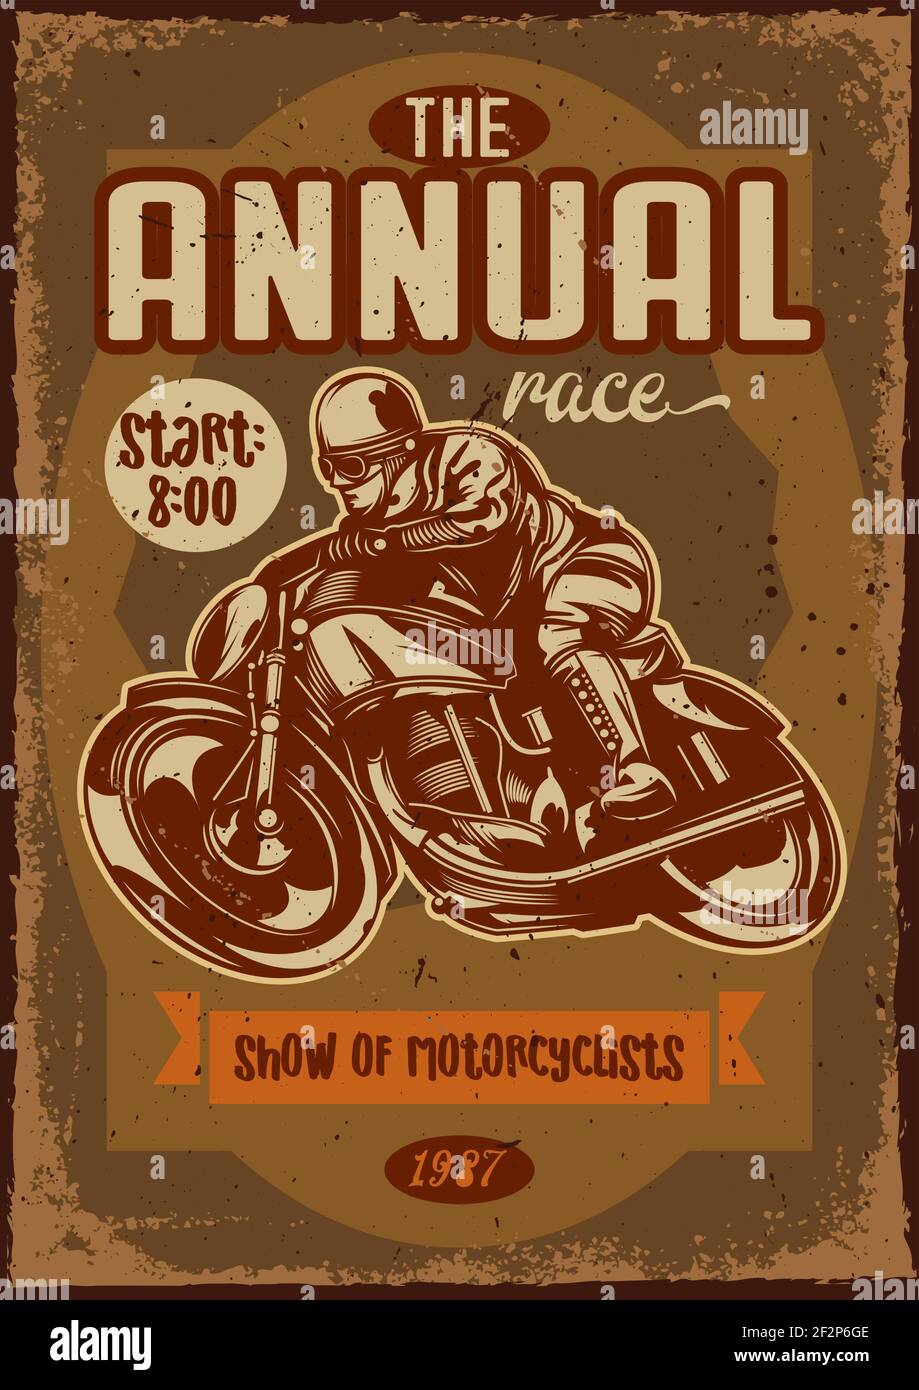 Poster design with illustration of a motorcycle and a rider on vintage background. Stock Vector